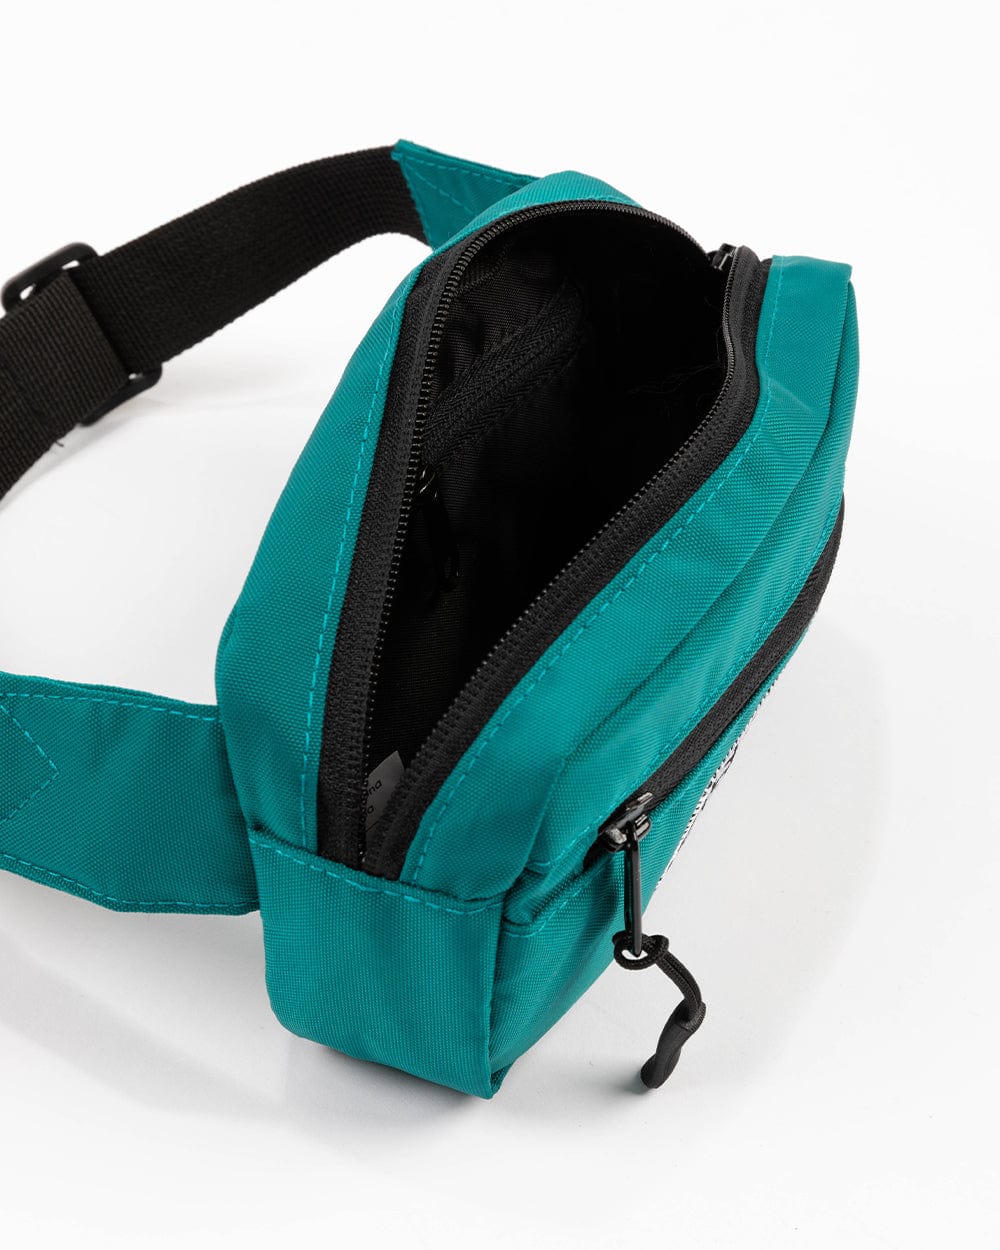 Keep Nature Wild PREORDER: KNW Fanny Pack Mini | Teal